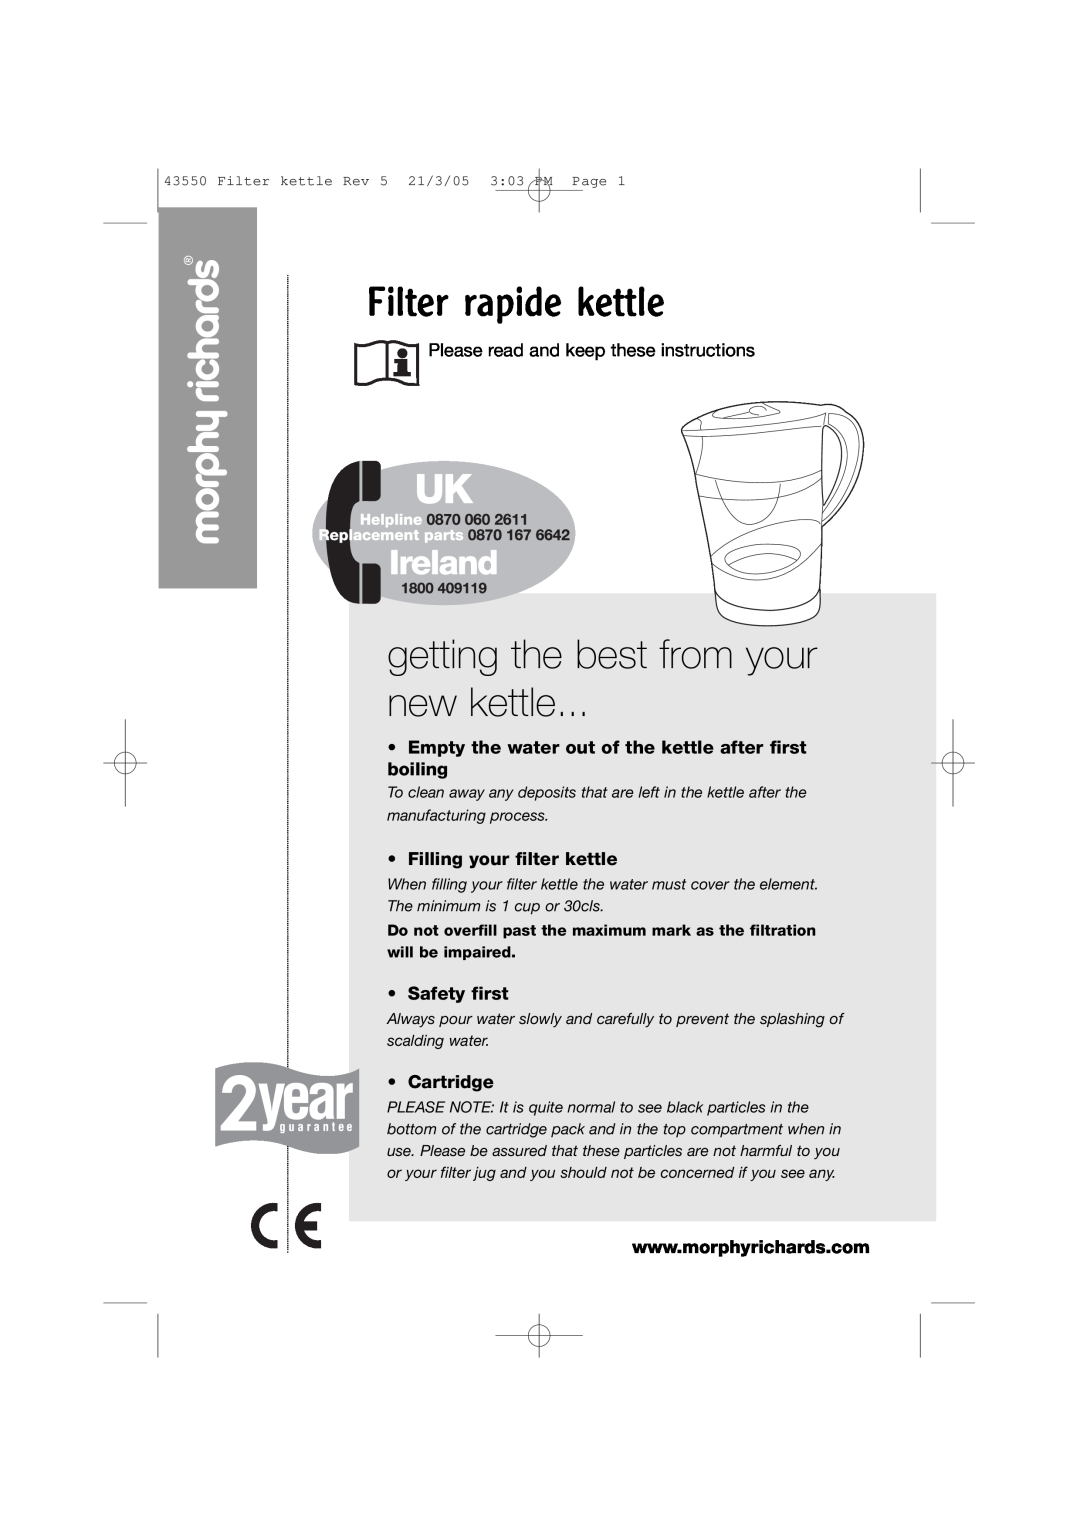 Morphy Richards Filter rapide kettle manual getting the best from your new kettle, Please read and keep these instructions 